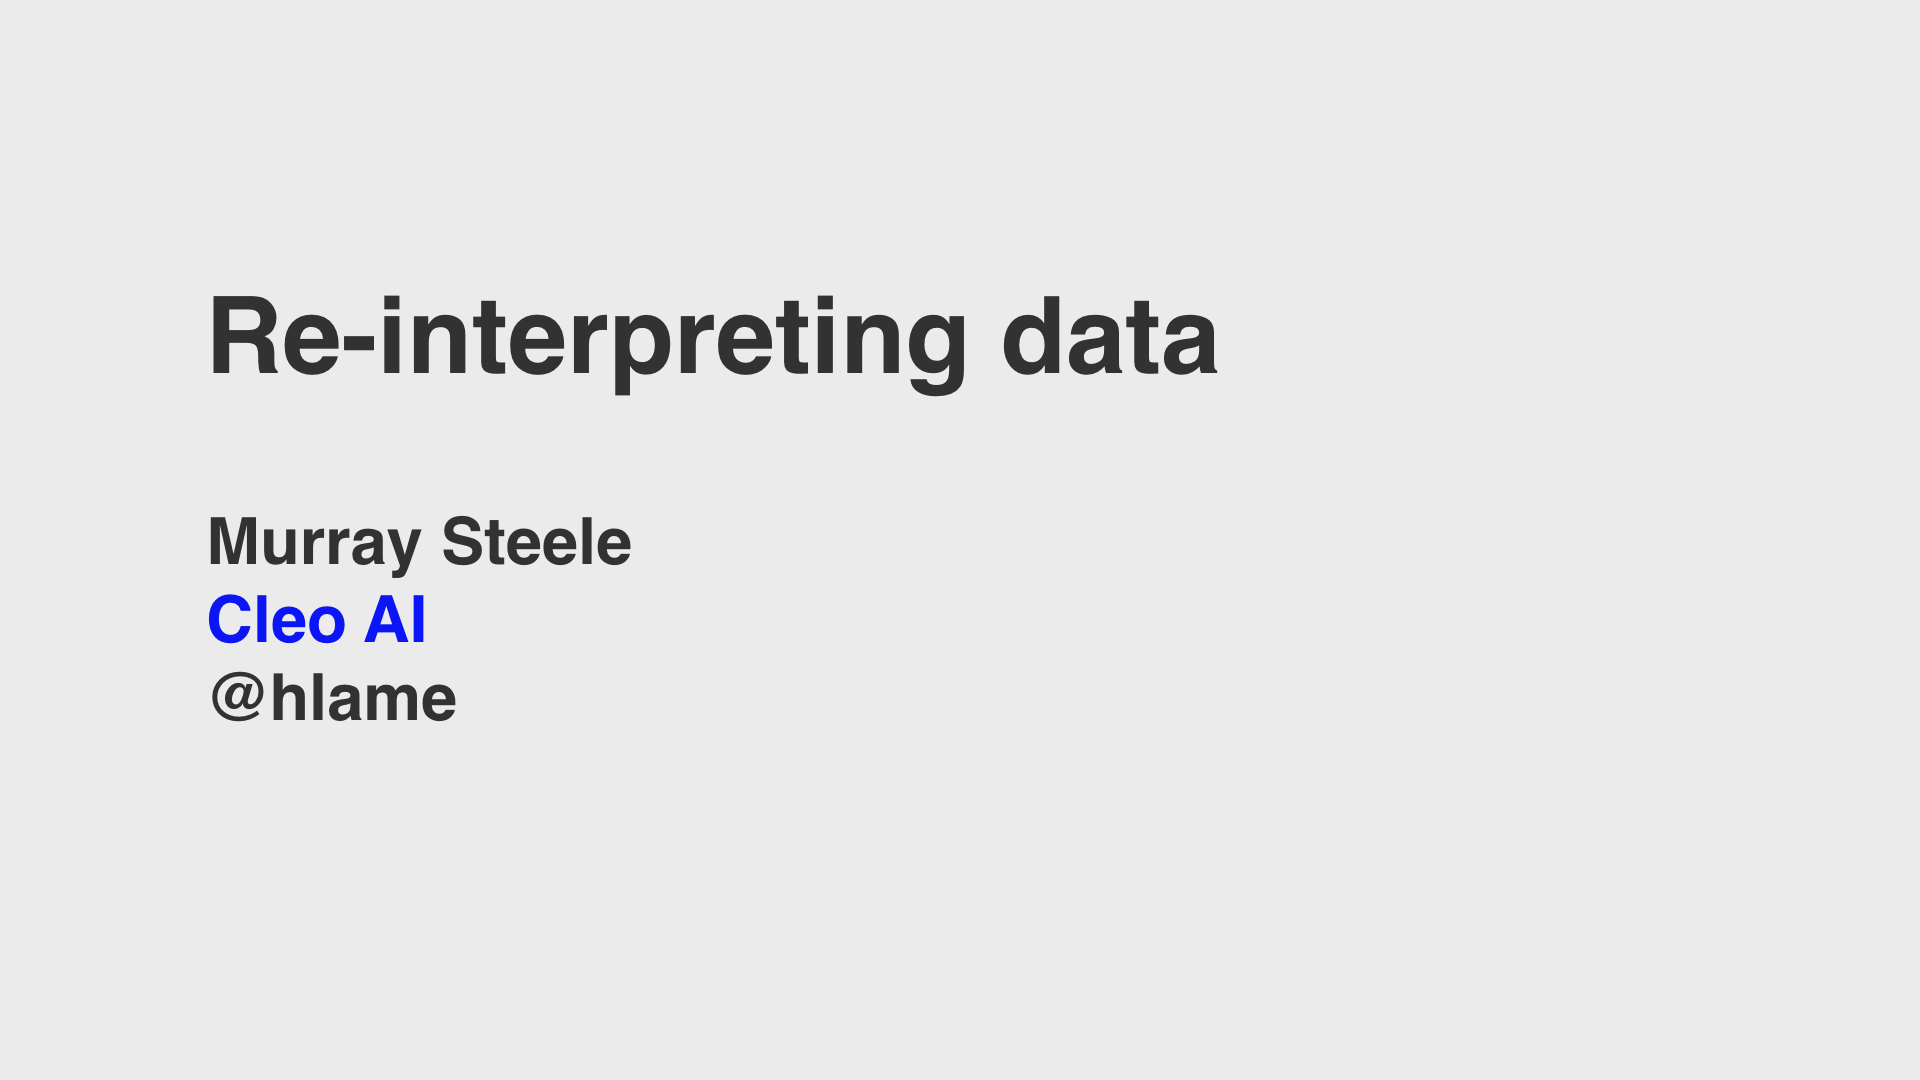 Title slide from my talk “Re-interpreting data”, text: Re-interpreting data, Murray Steele, Cleo AI, @hlame